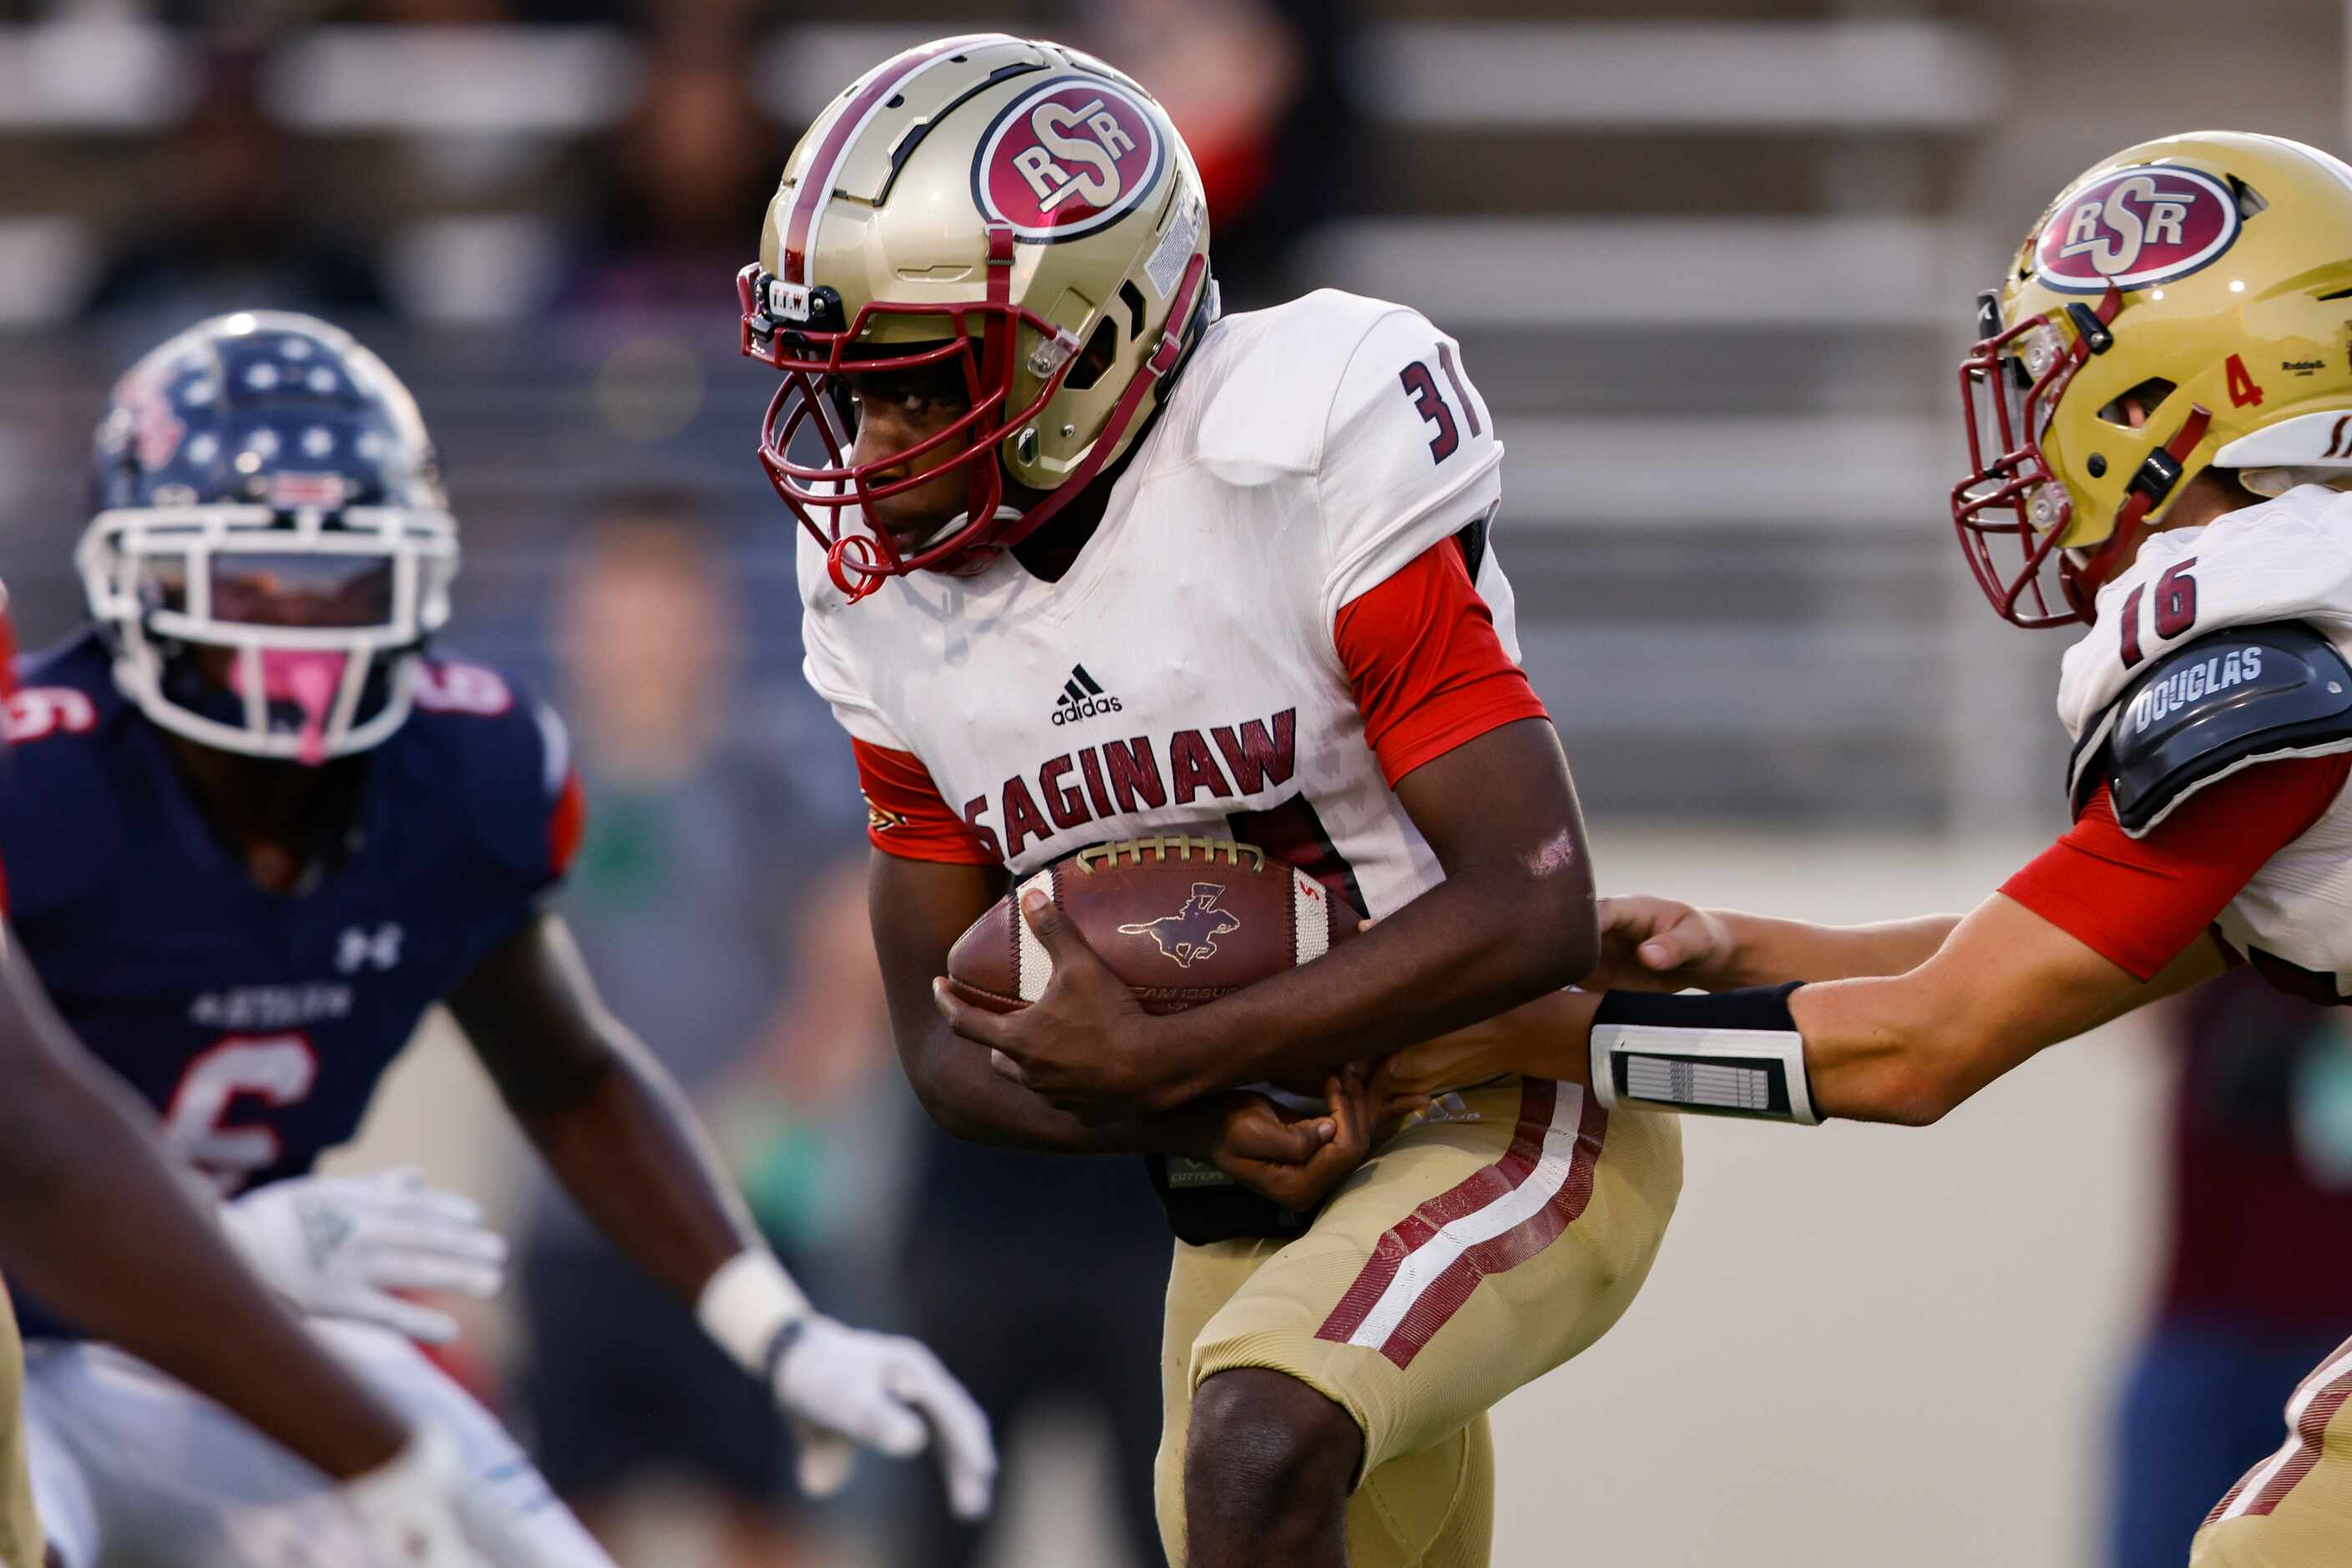 Saginaw’s running back Don’na Wren (31) is handed the ball by quarterback Giovanni Petrella...